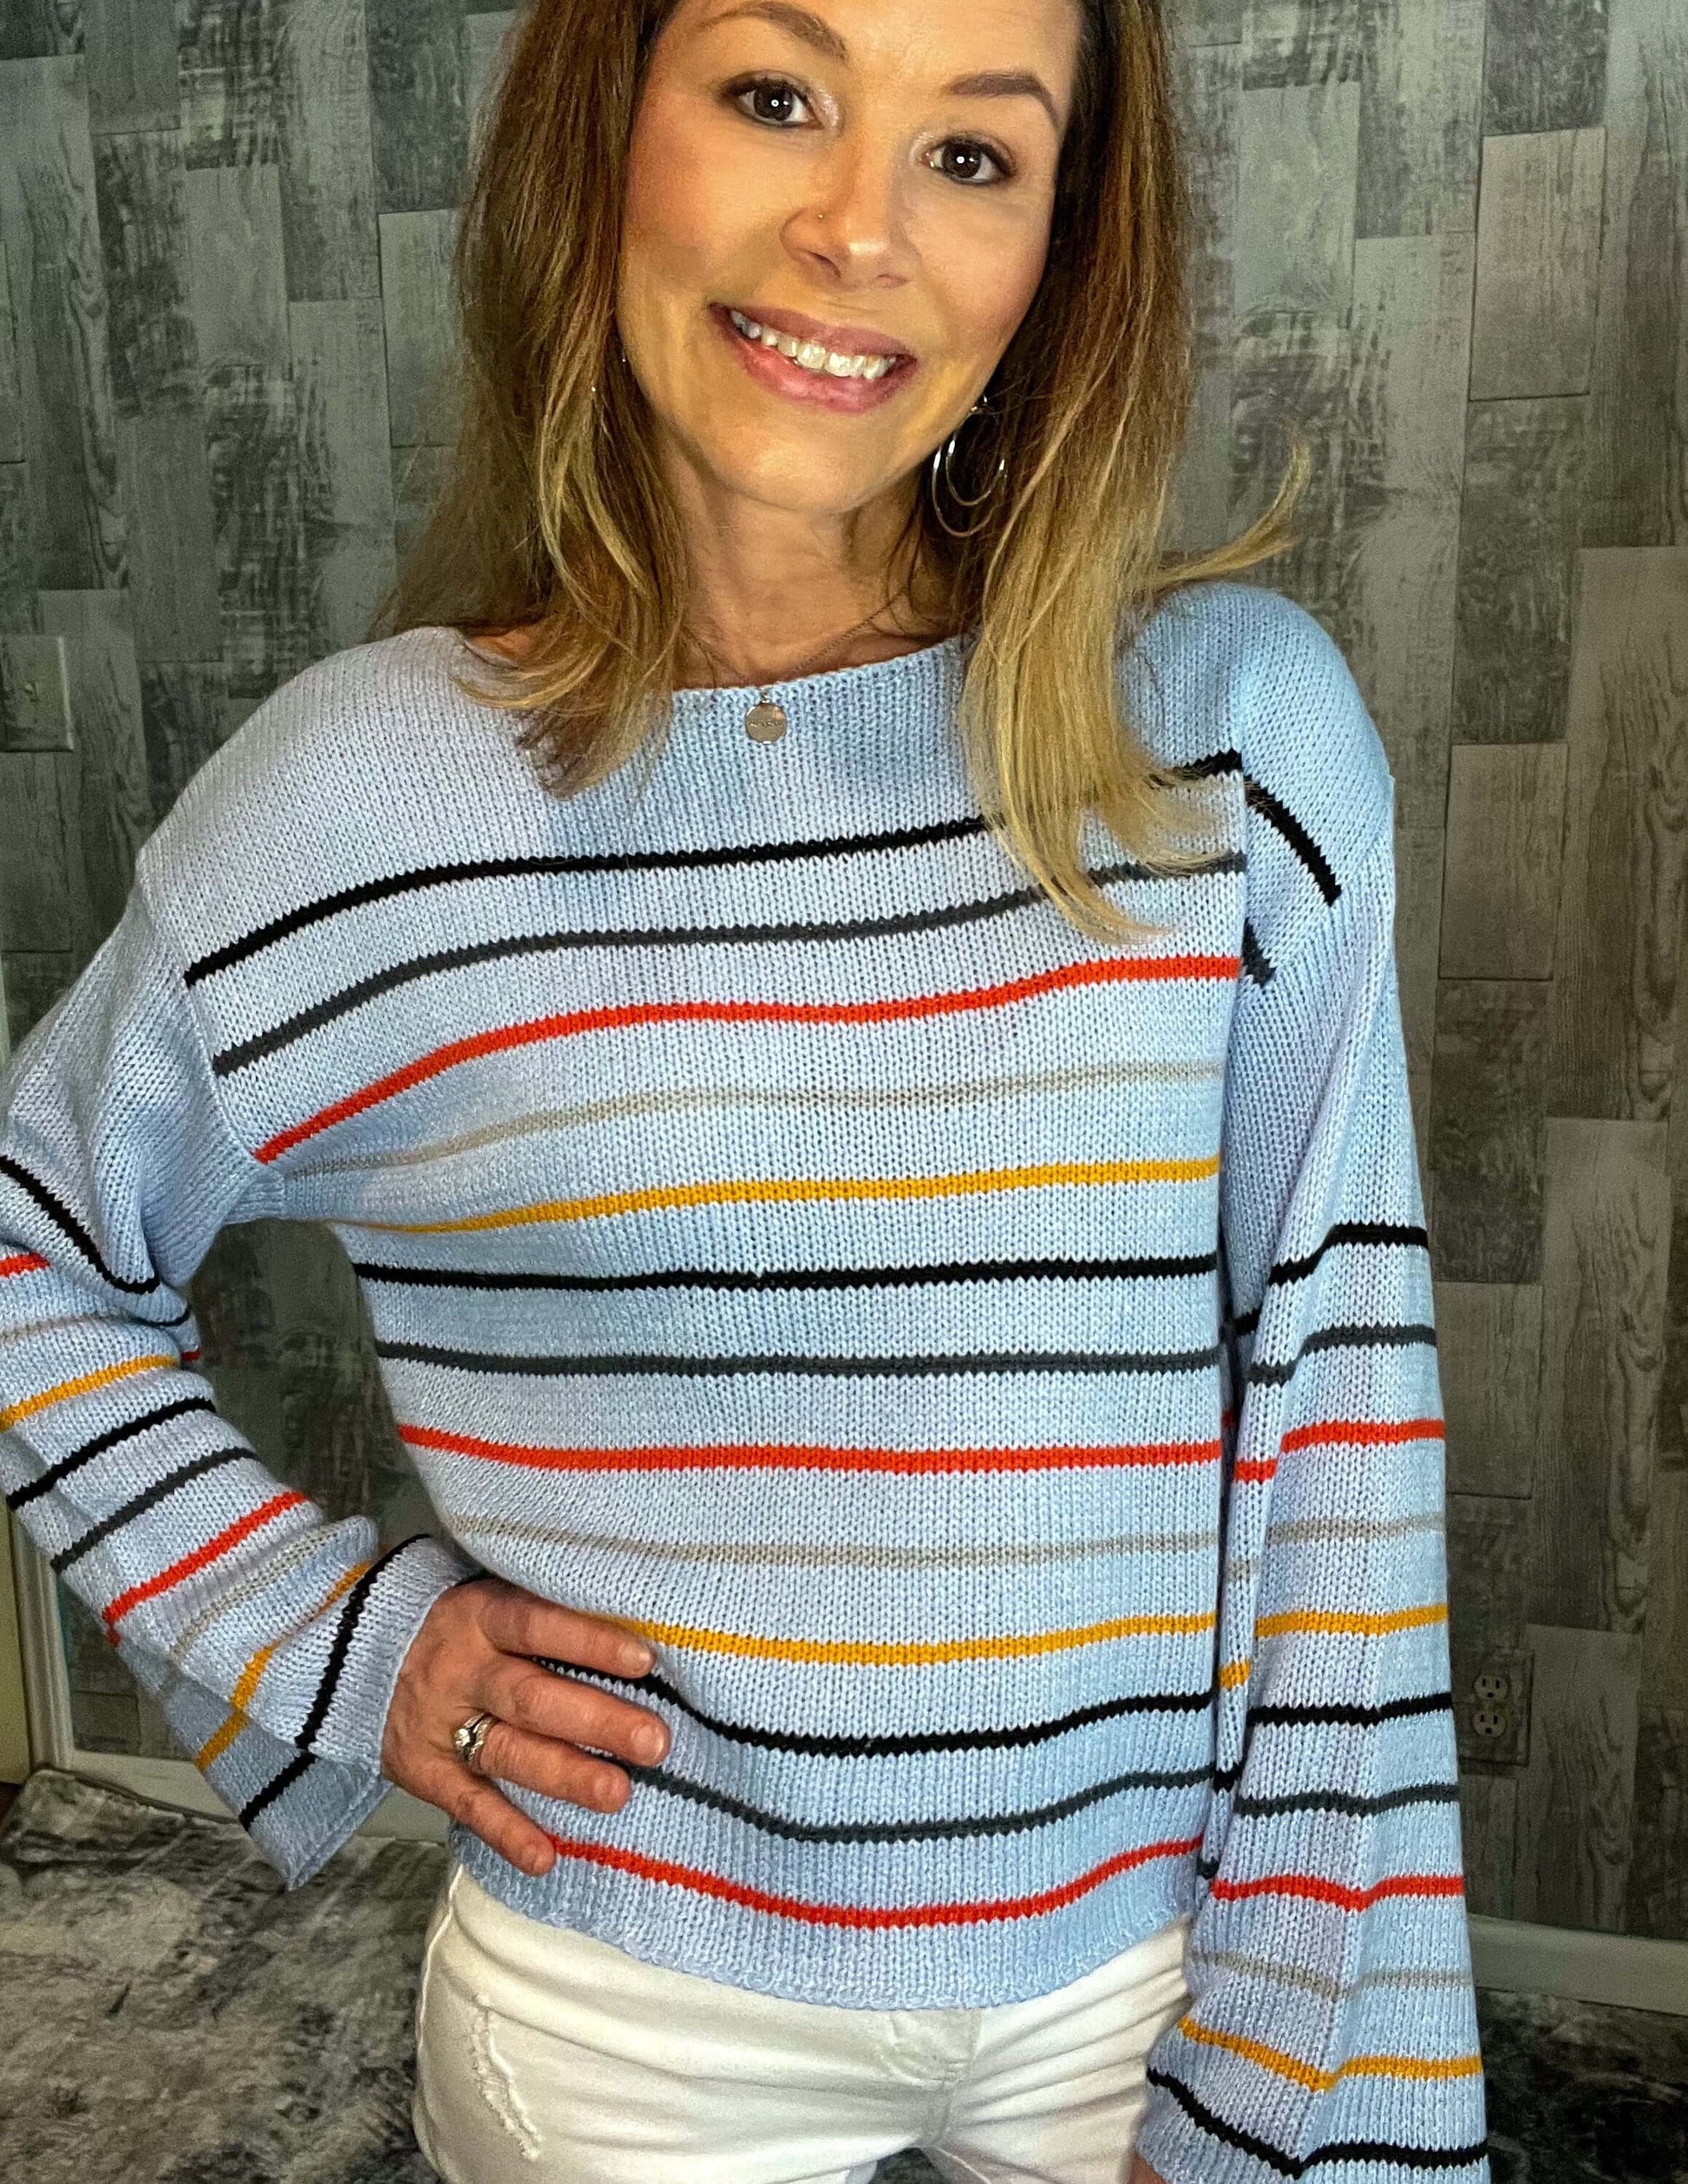 Shirts & Tops 100% Acrylic, boat neck, button down blouse, button down top, clothing, long sleeve, long sleeve top, long sleeves, multi-color stripes, relaxed silhouette, retro long sleeve top, stripe detail, wide sleeve Size: Small, Medium, Large, XL